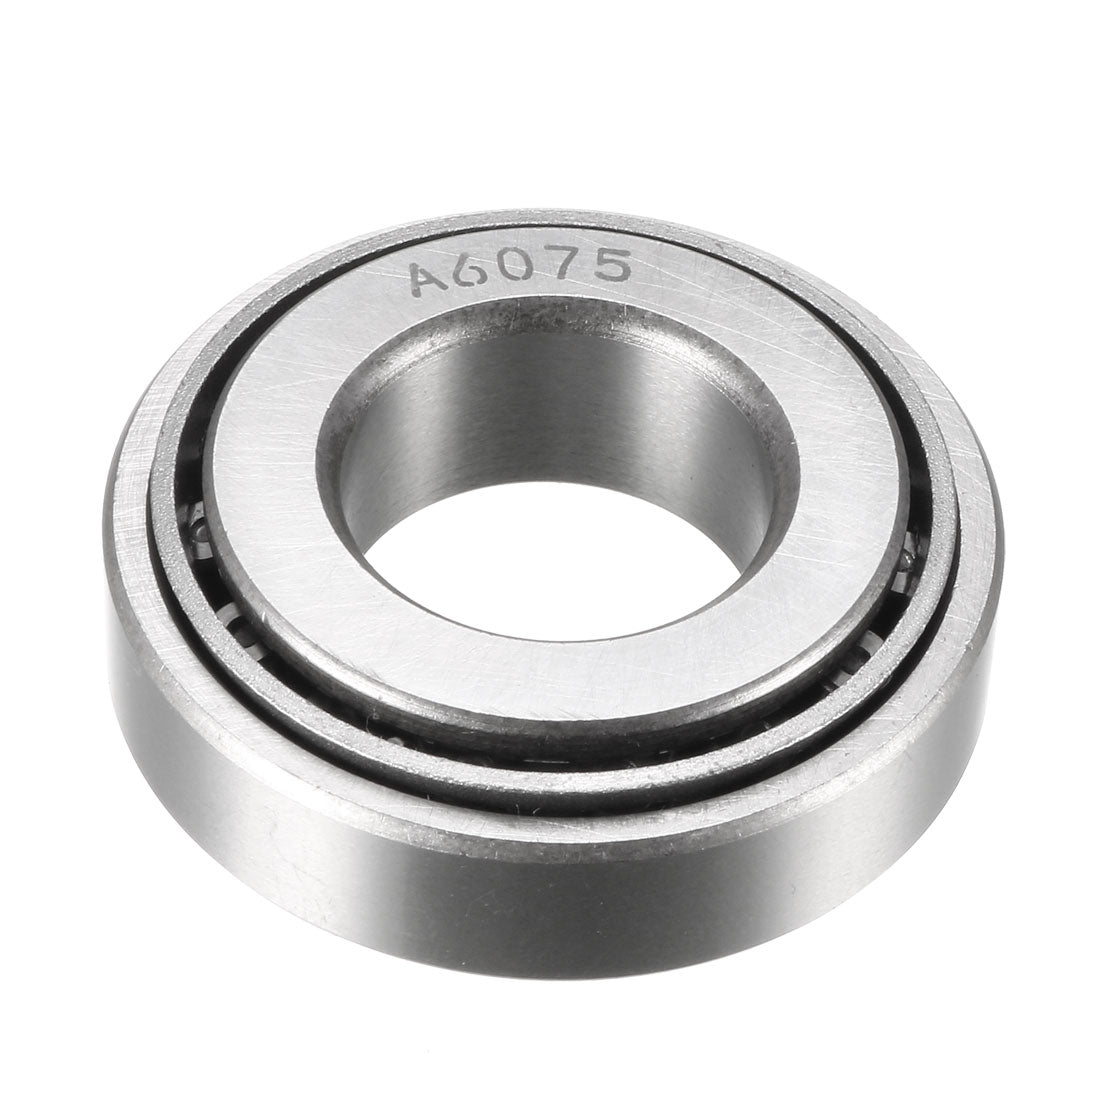 uxcell Uxcell A6075/A6157 Tapered Roller Bearing Cone and Cup Set 0.75" Bore 1.5745" O.D.